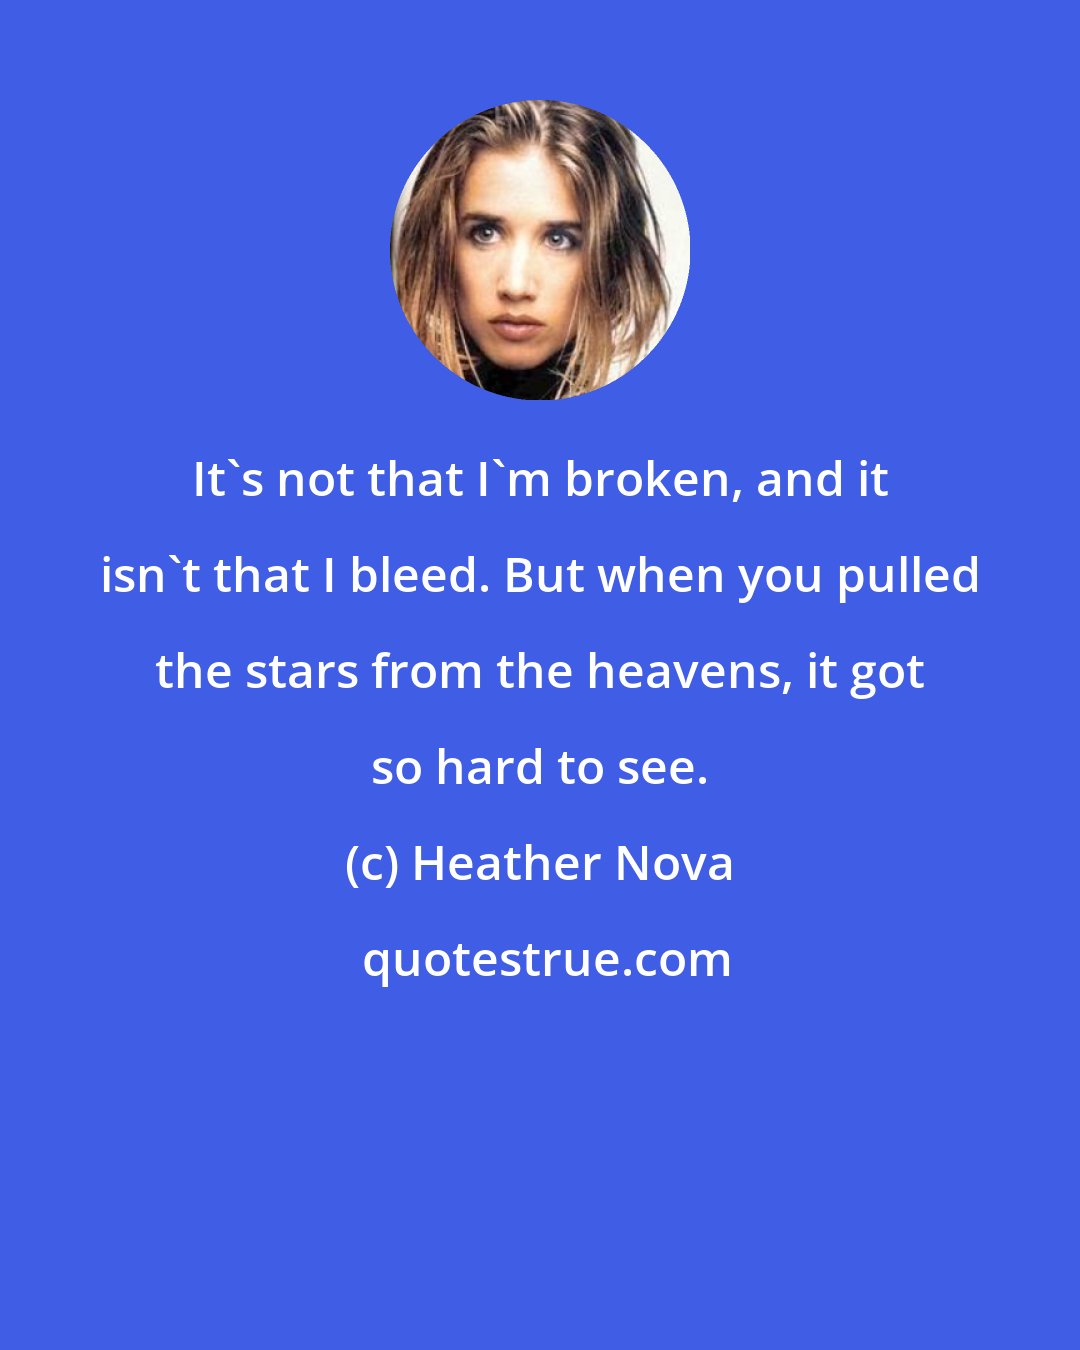 Heather Nova: It's not that I'm broken, and it isn't that I bleed. But when you pulled the stars from the heavens, it got so hard to see.